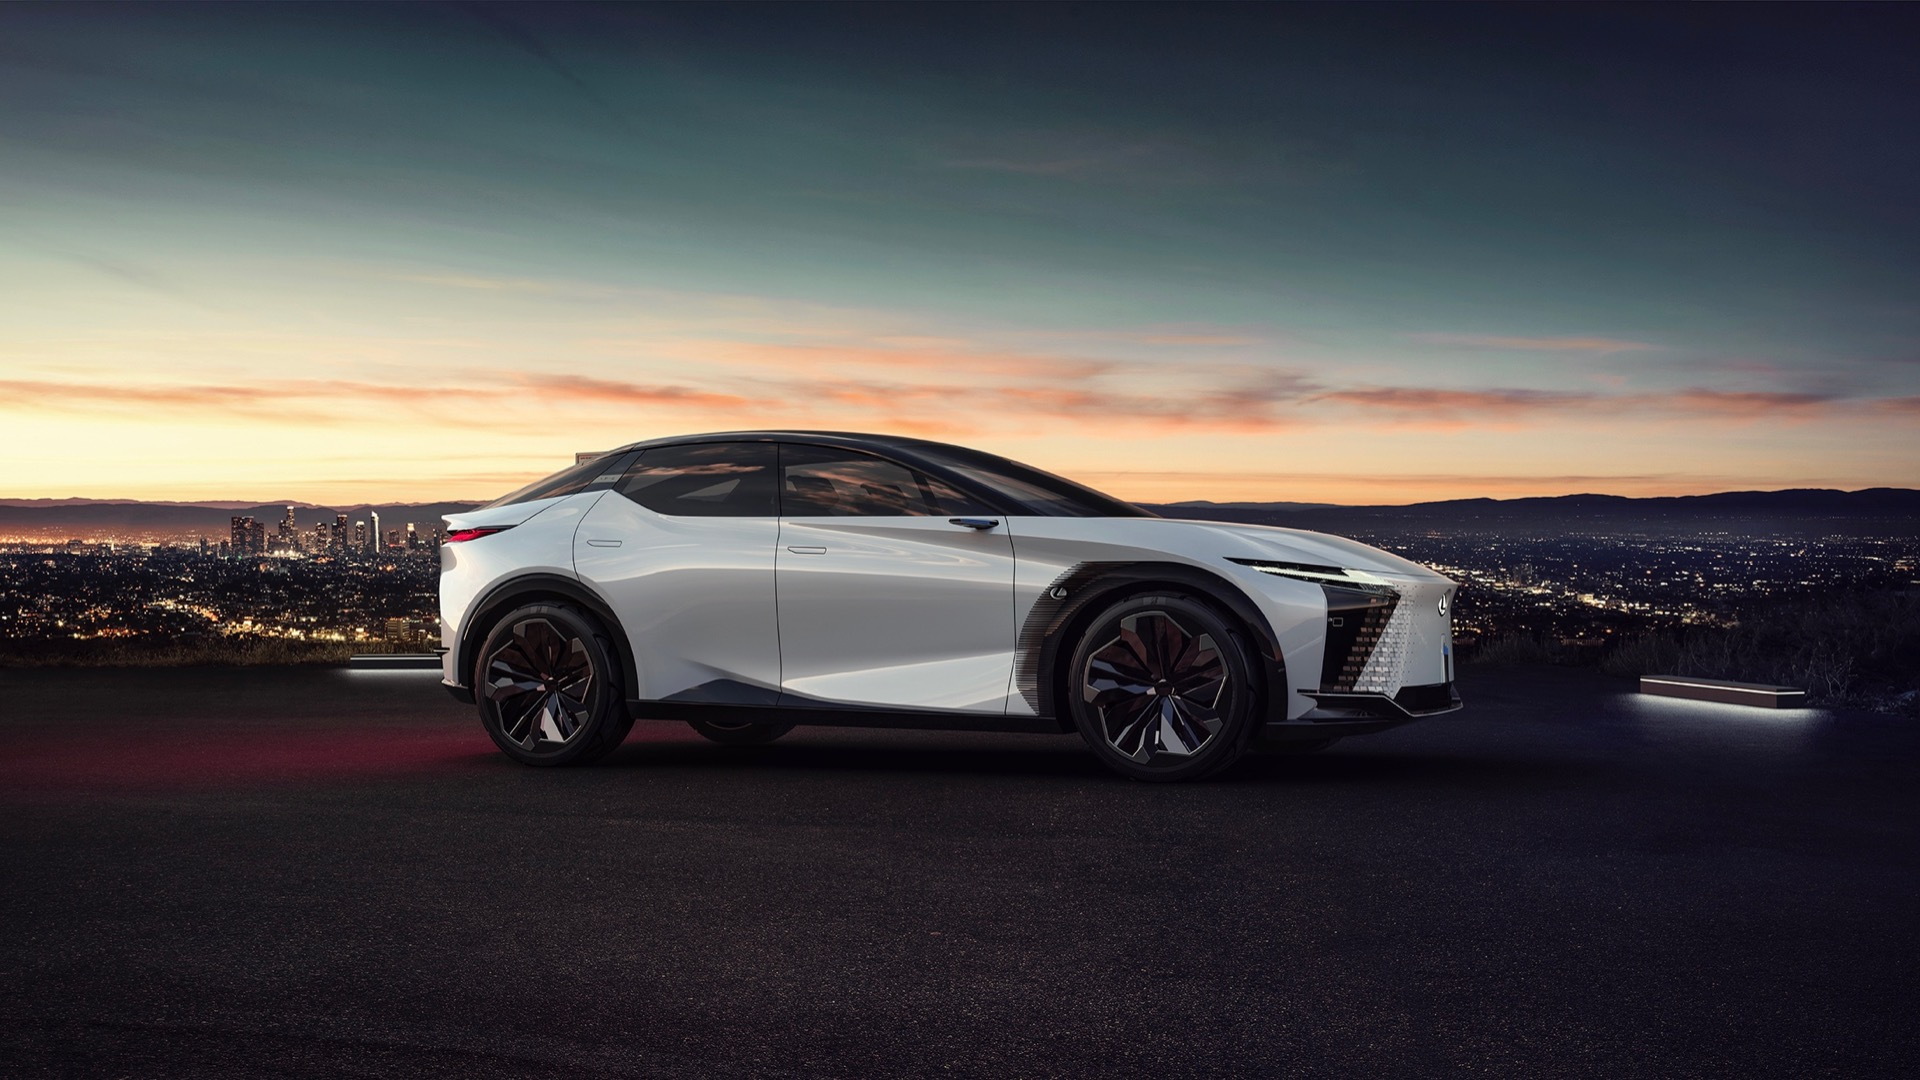 Lexus Lf Z Electrified Concept Sleek Crossover Previews Future Evs From Toyota Luxury Brand